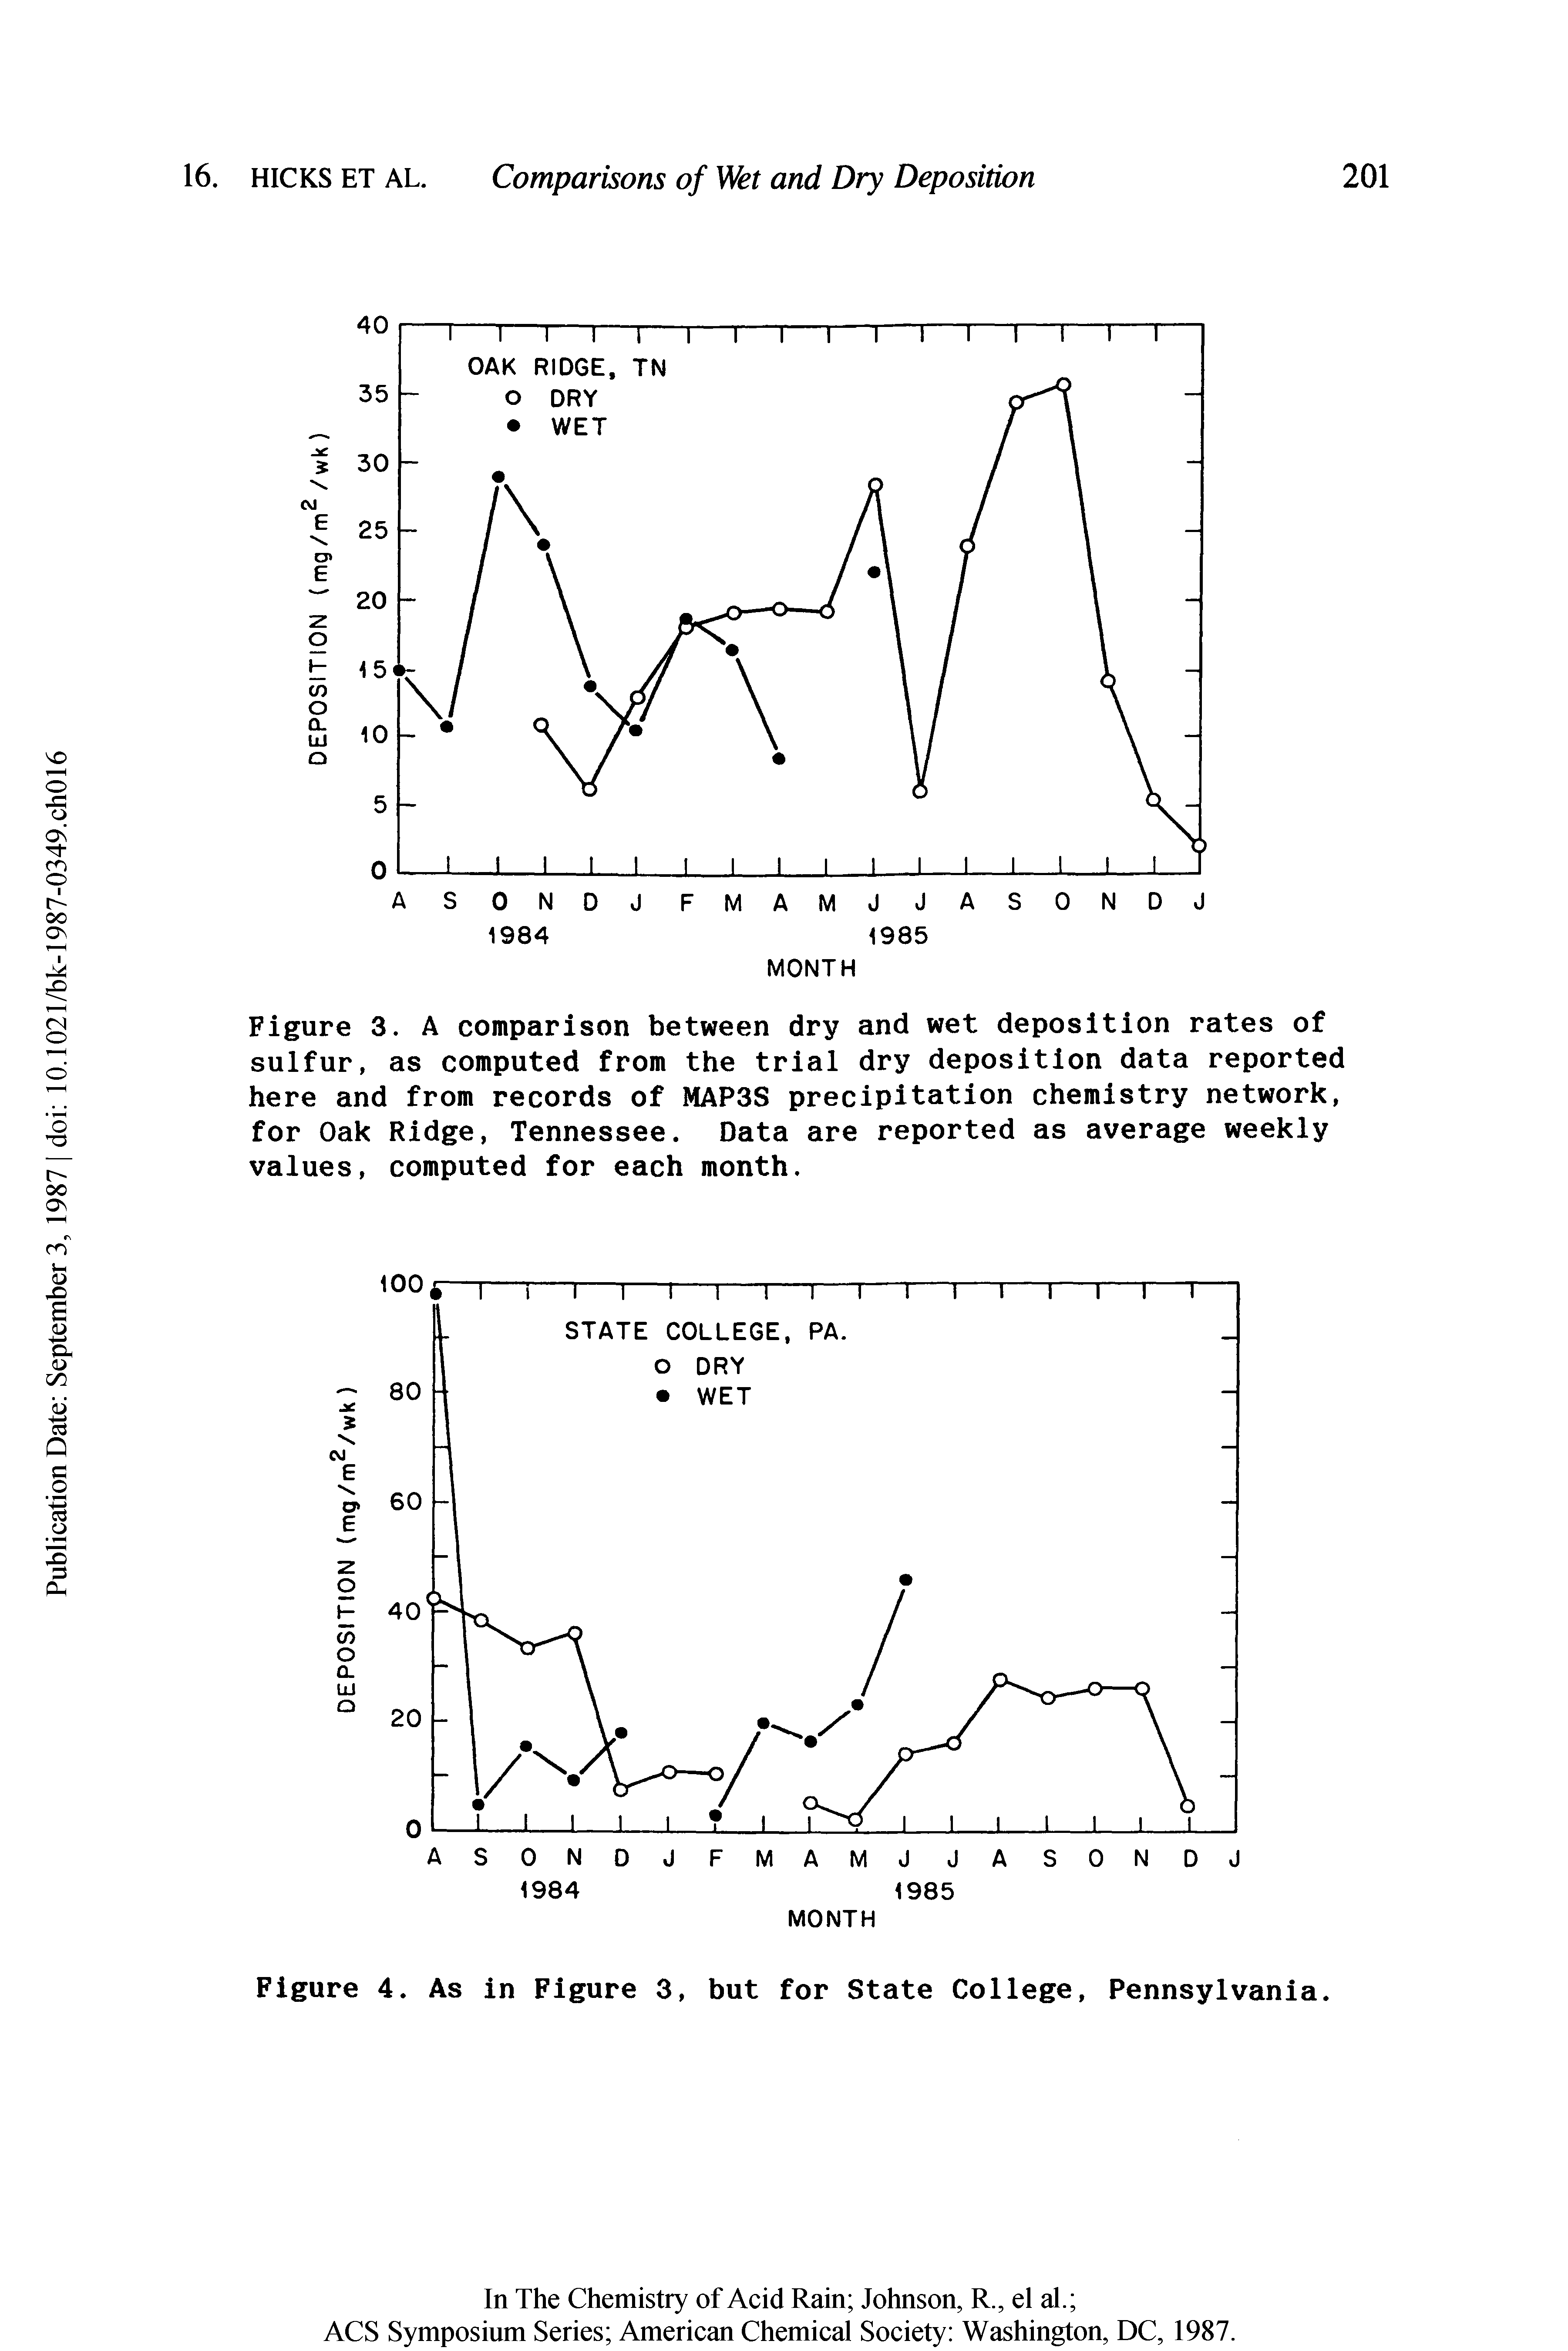 Figure 3. A comparison between dry and wet deposition rates of sulfur, as computed from the trial dry deposition data reported here and from records of MAP3S precipitation chemistry network, for Oak Ridge, Tennessee. Data are reported as average weekly values, computed for each month.